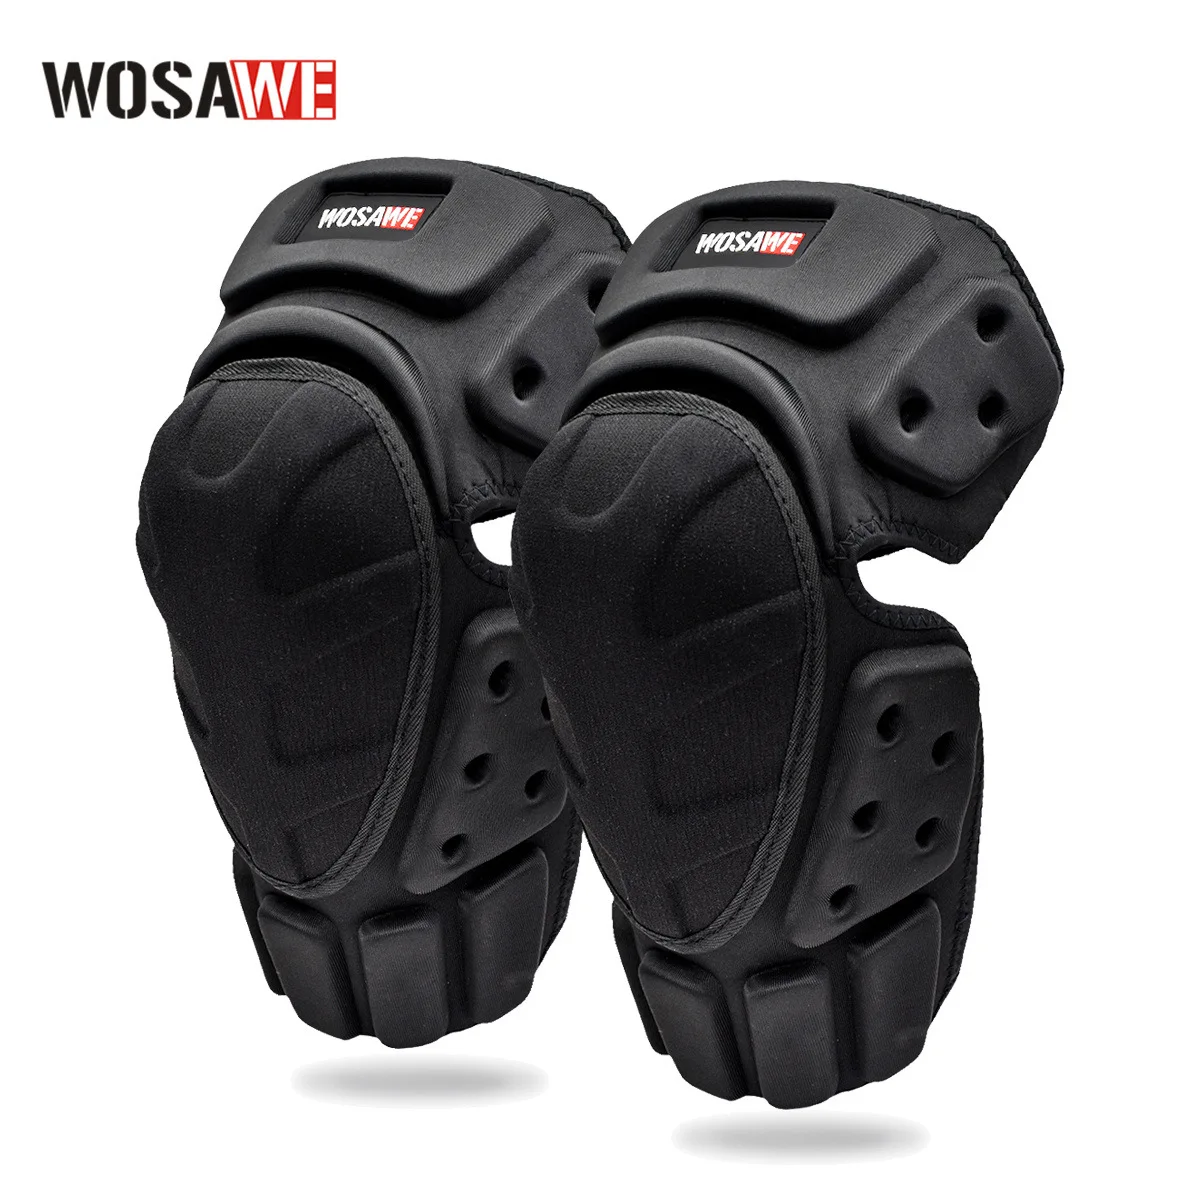 

WOSAWE Motorcycle Knee Pads Safety Guards Impact Resistance Calf Protector Motocross Riding Off-Road Leg Armor Moto Gears